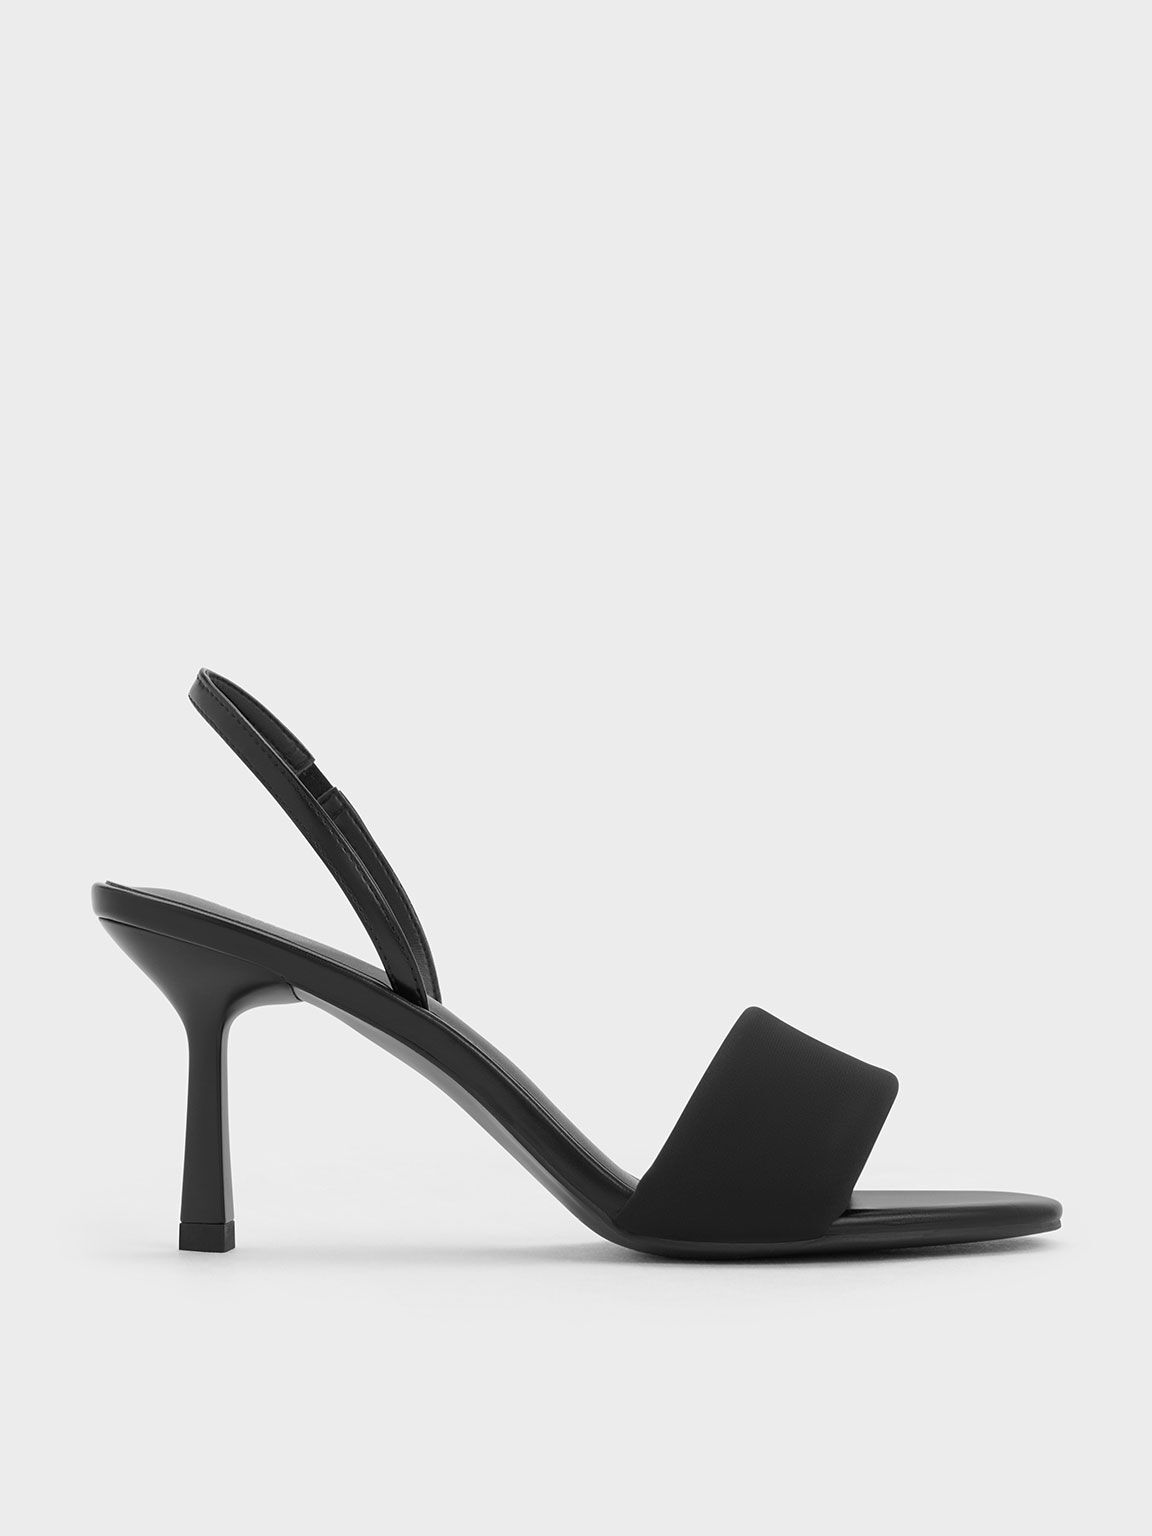 Charles & Keith - Floral Lucite Heel Sandals - Valiram Group